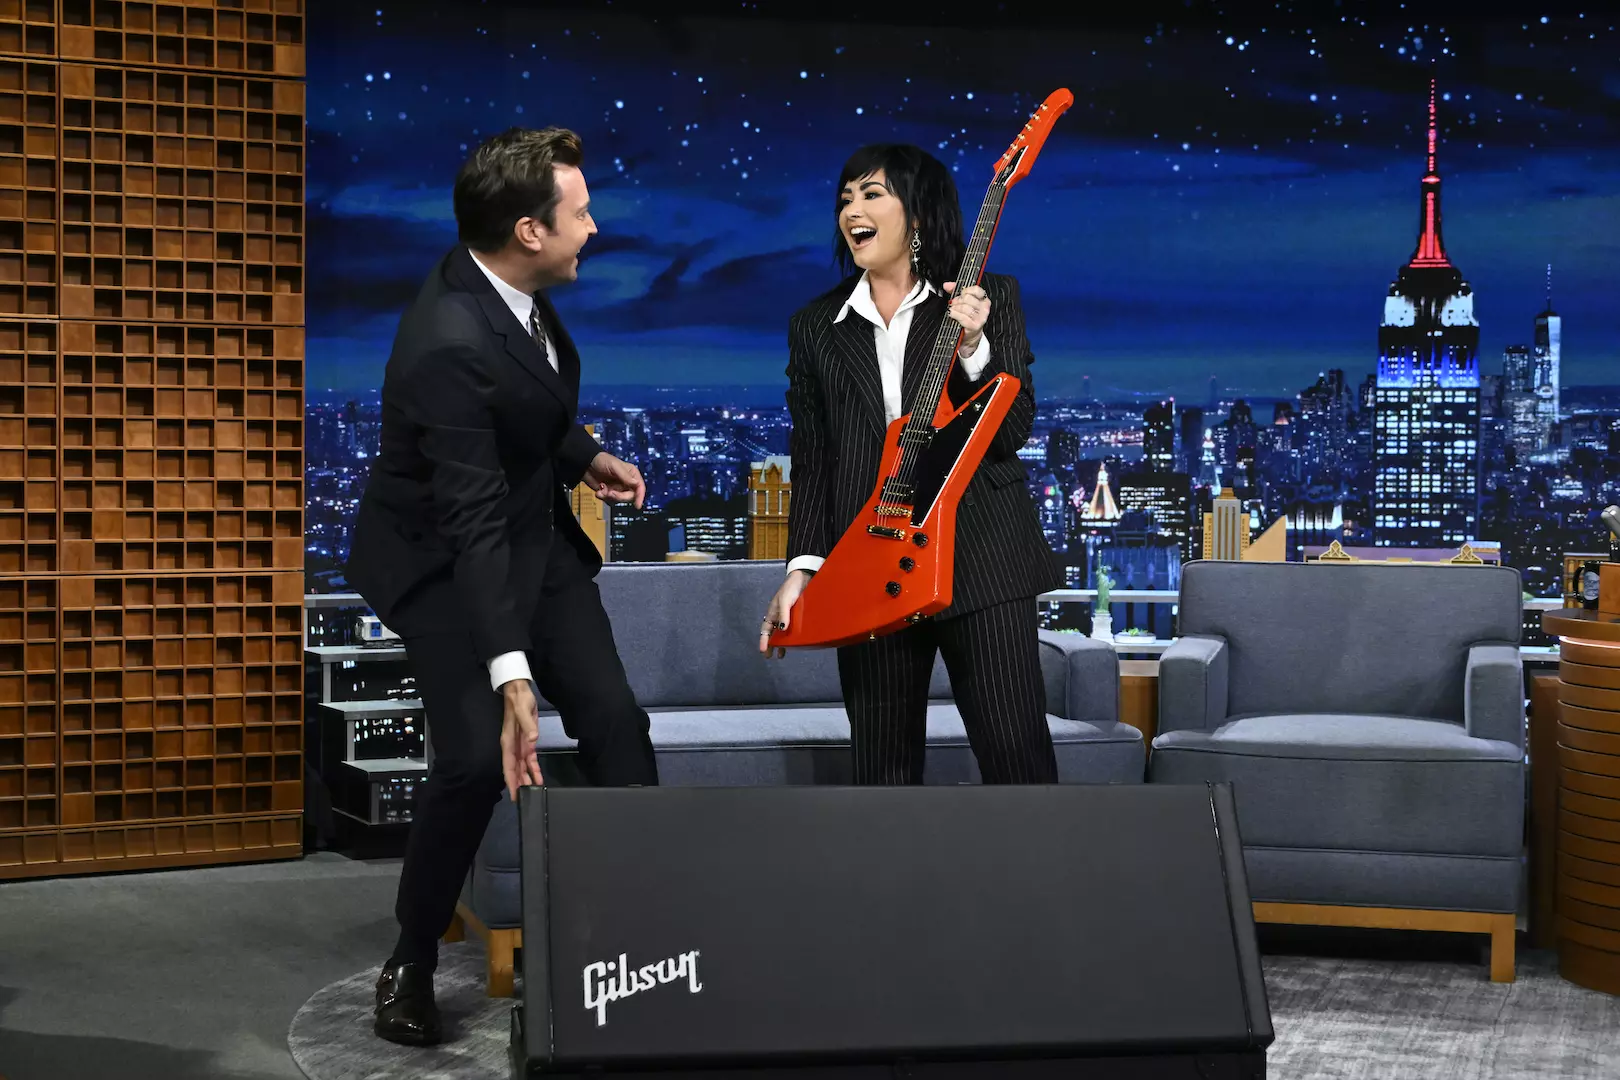 Demi Lovato Played a Super Metal-Looking Guitar on 'Fallon'